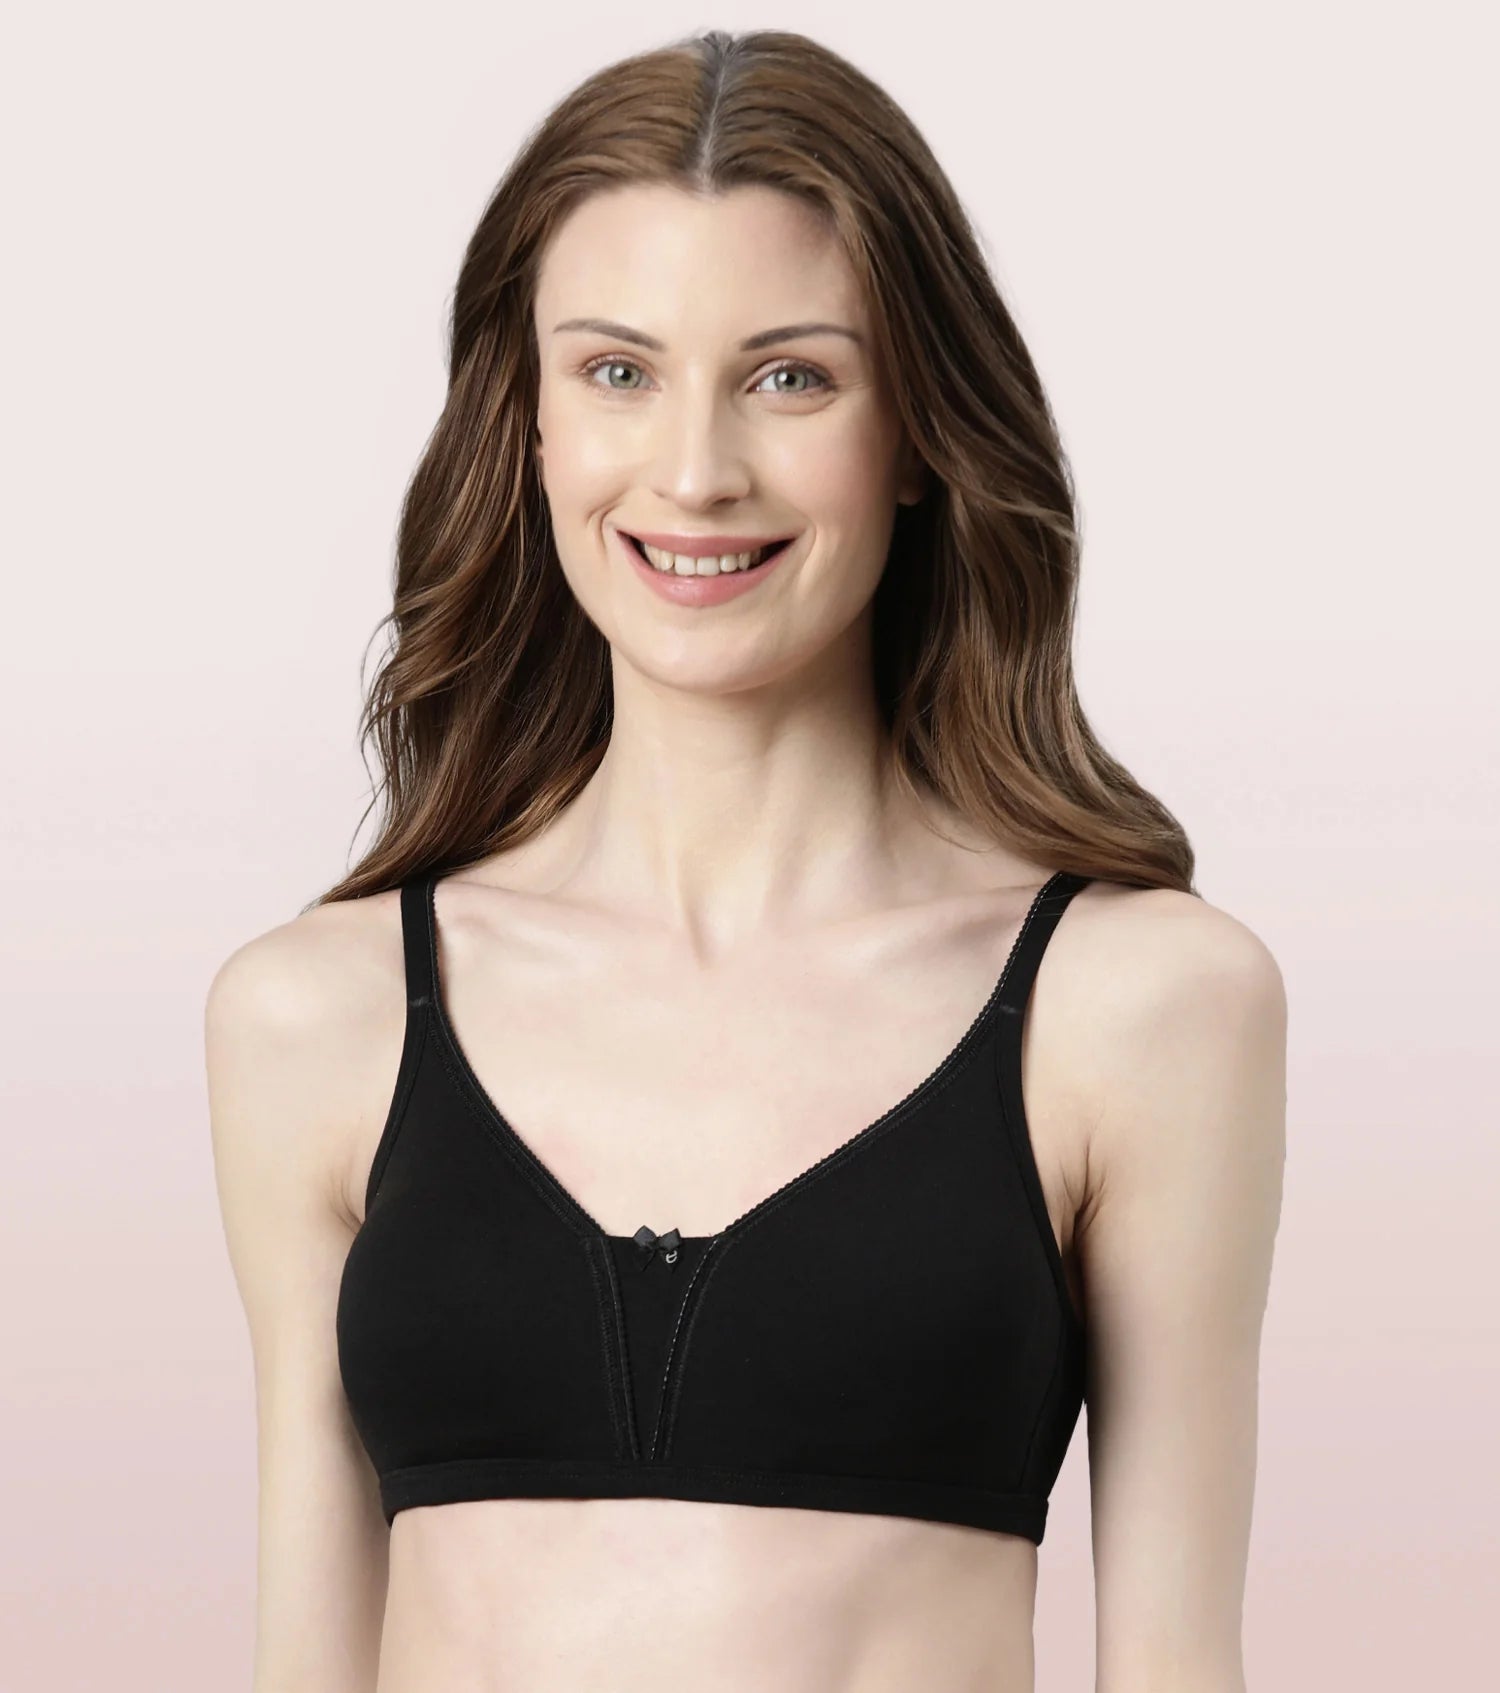 Buy Enamor F087 Non Padded Wired Full Coverage Perfect Lift Full Support  Bra - Purple online